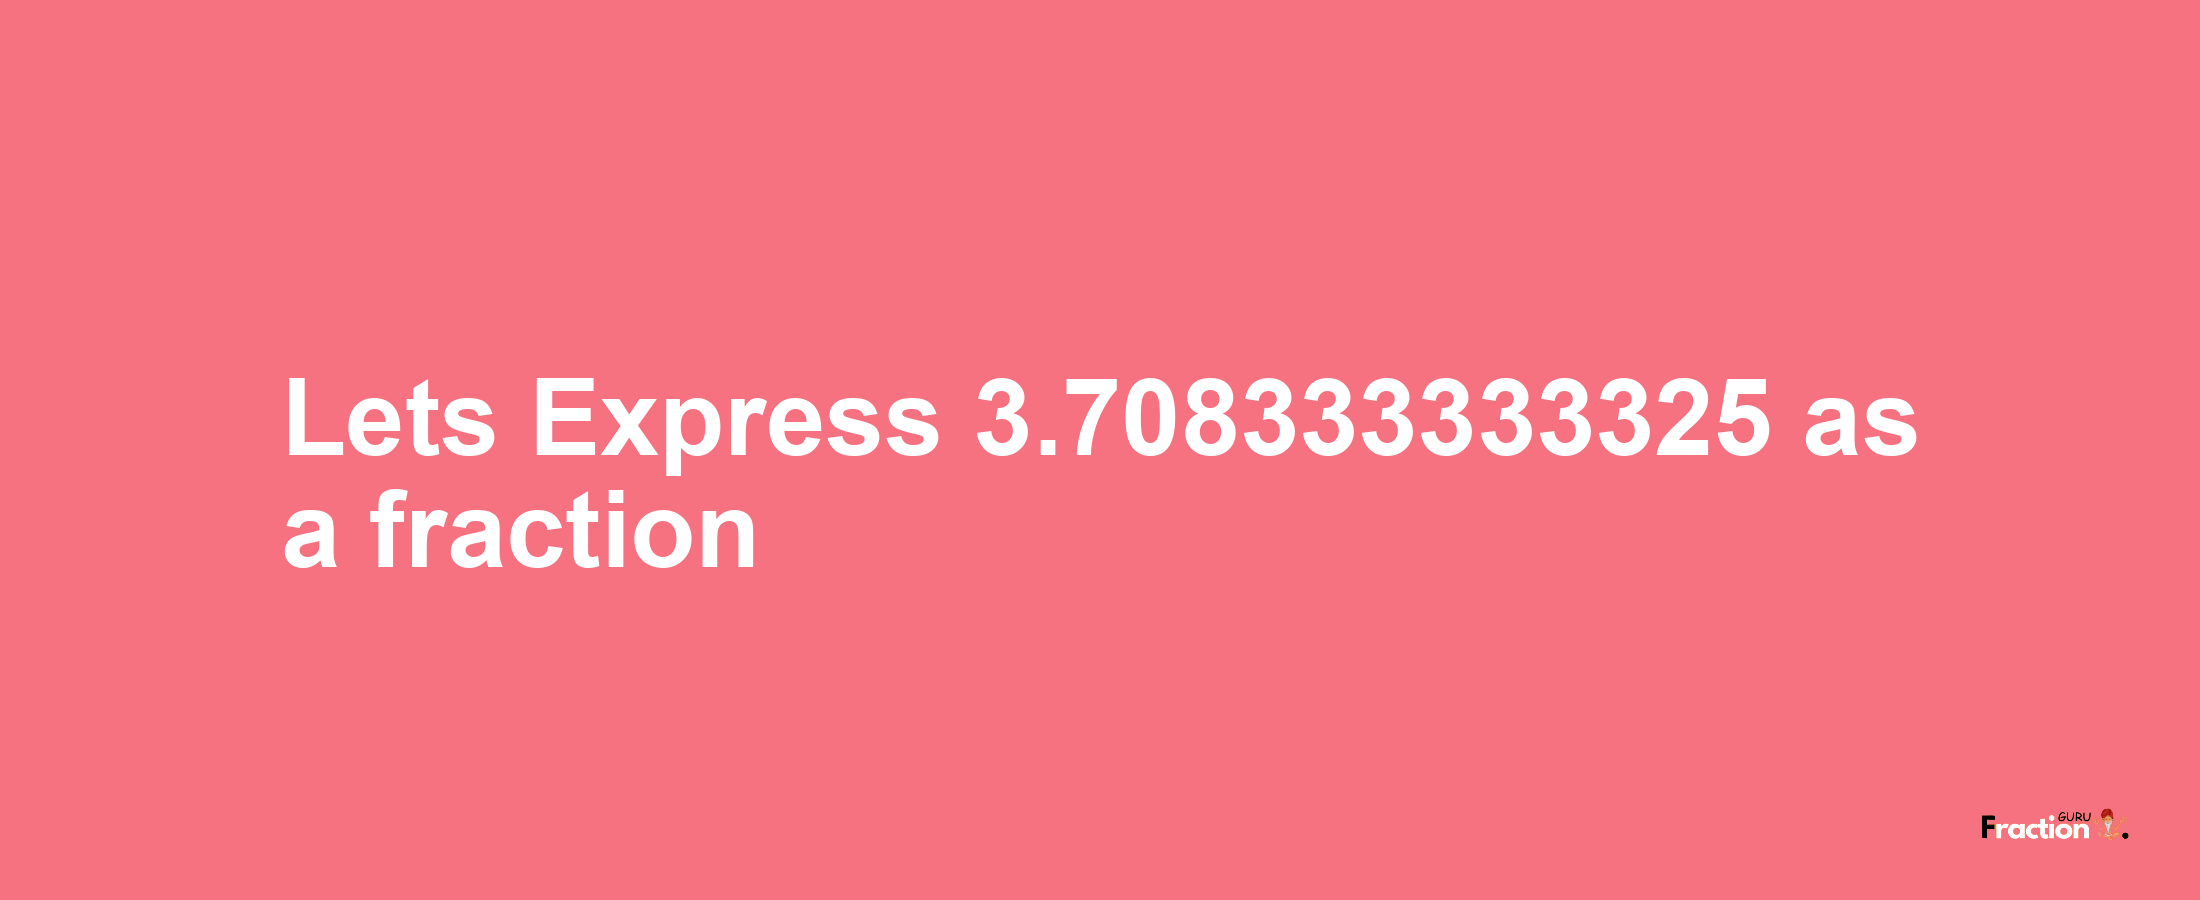 Lets Express 3.708333333325 as afraction